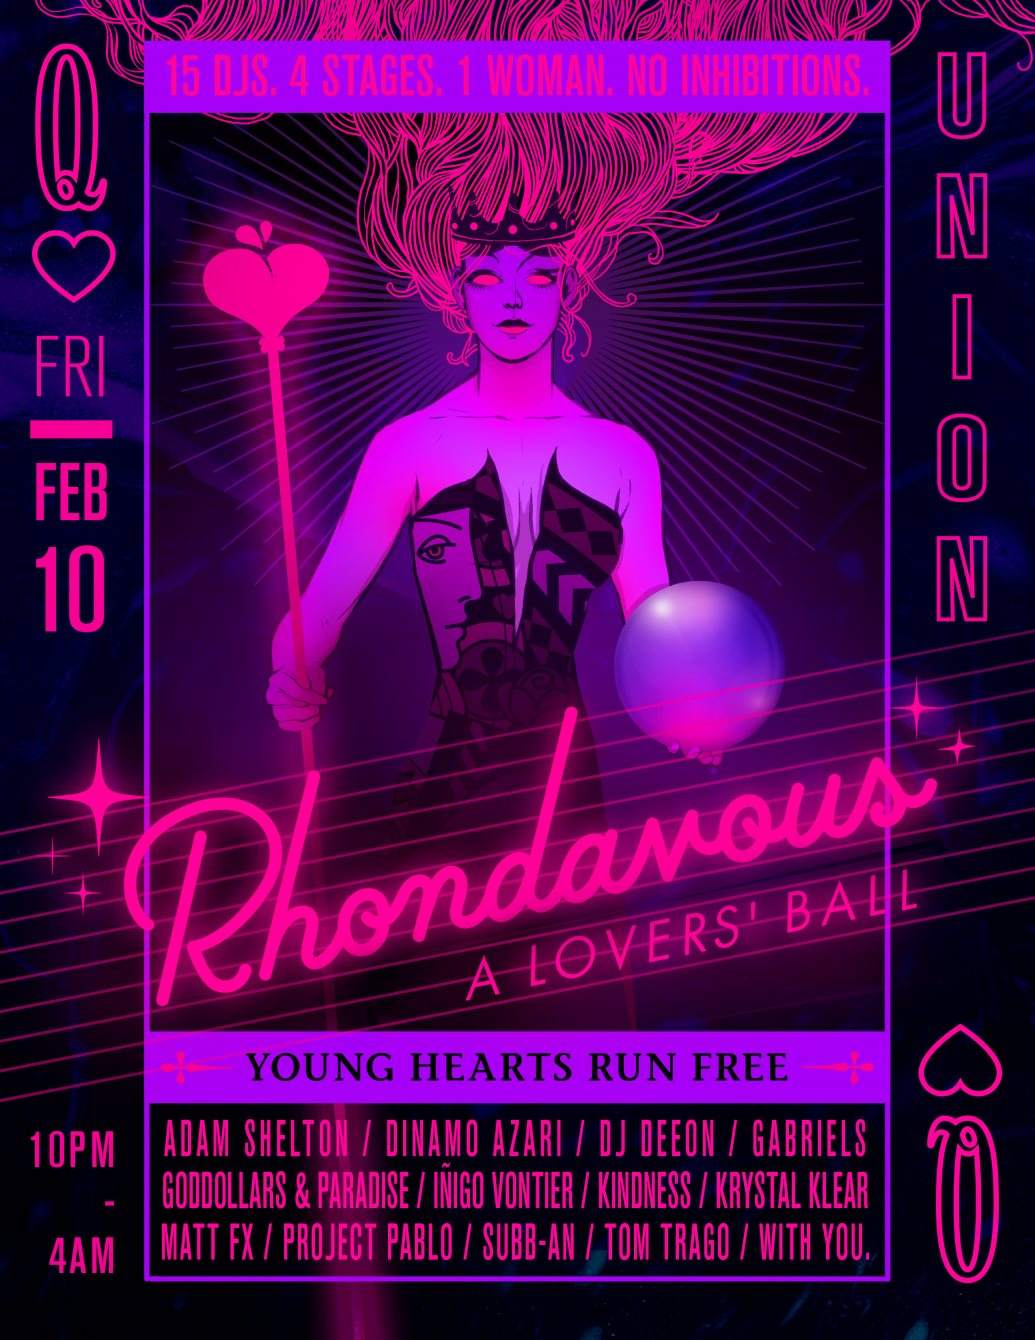 Rhondavous: A Lover's Ball - Página frontal